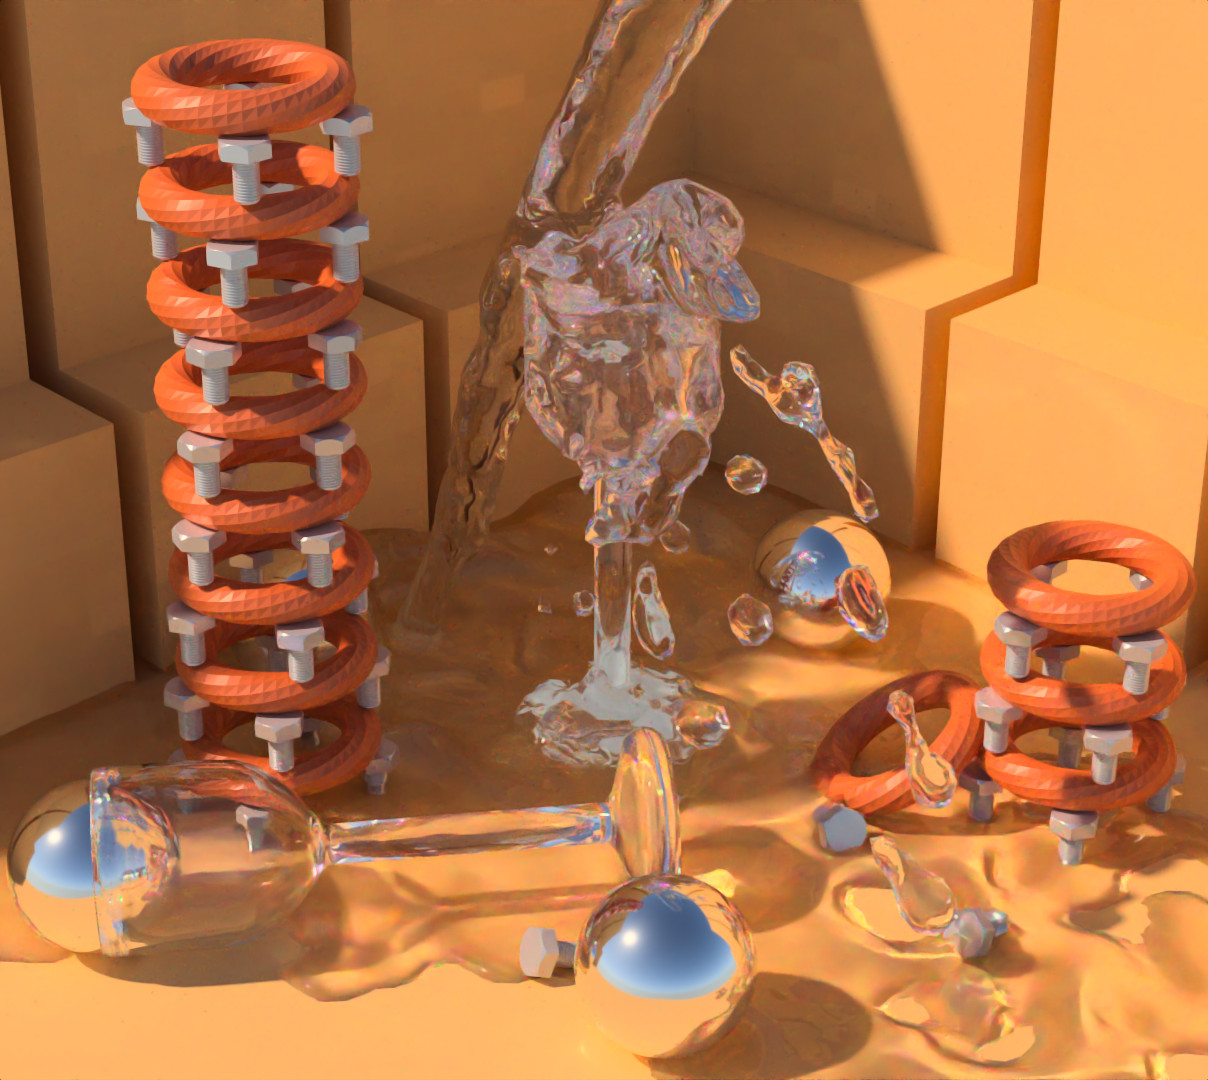 Example render by PearRay. Modeled with Blender 2.80